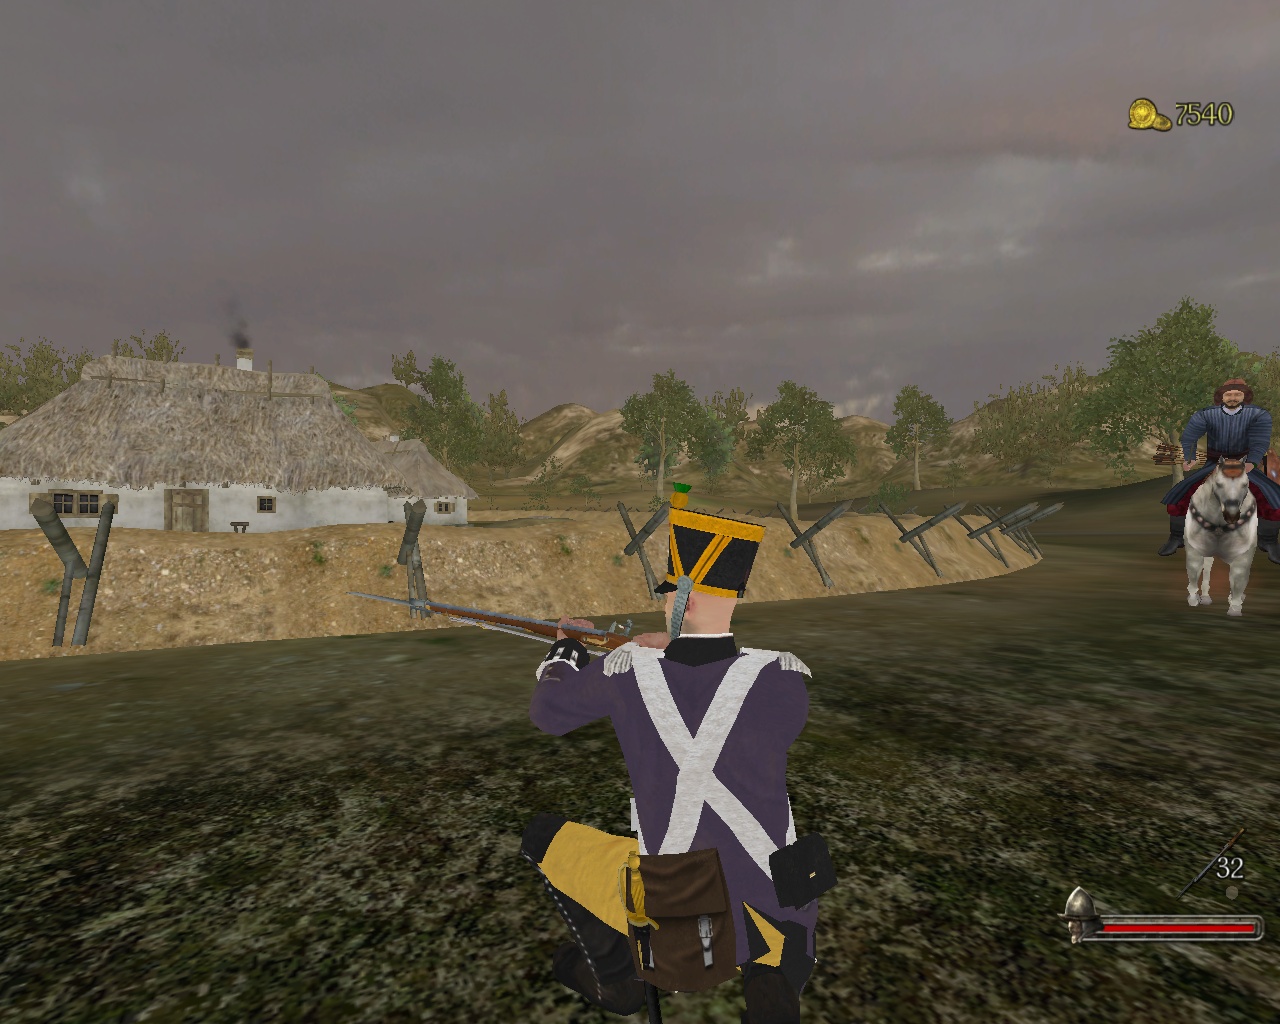 mount and blade with fire and sword mod